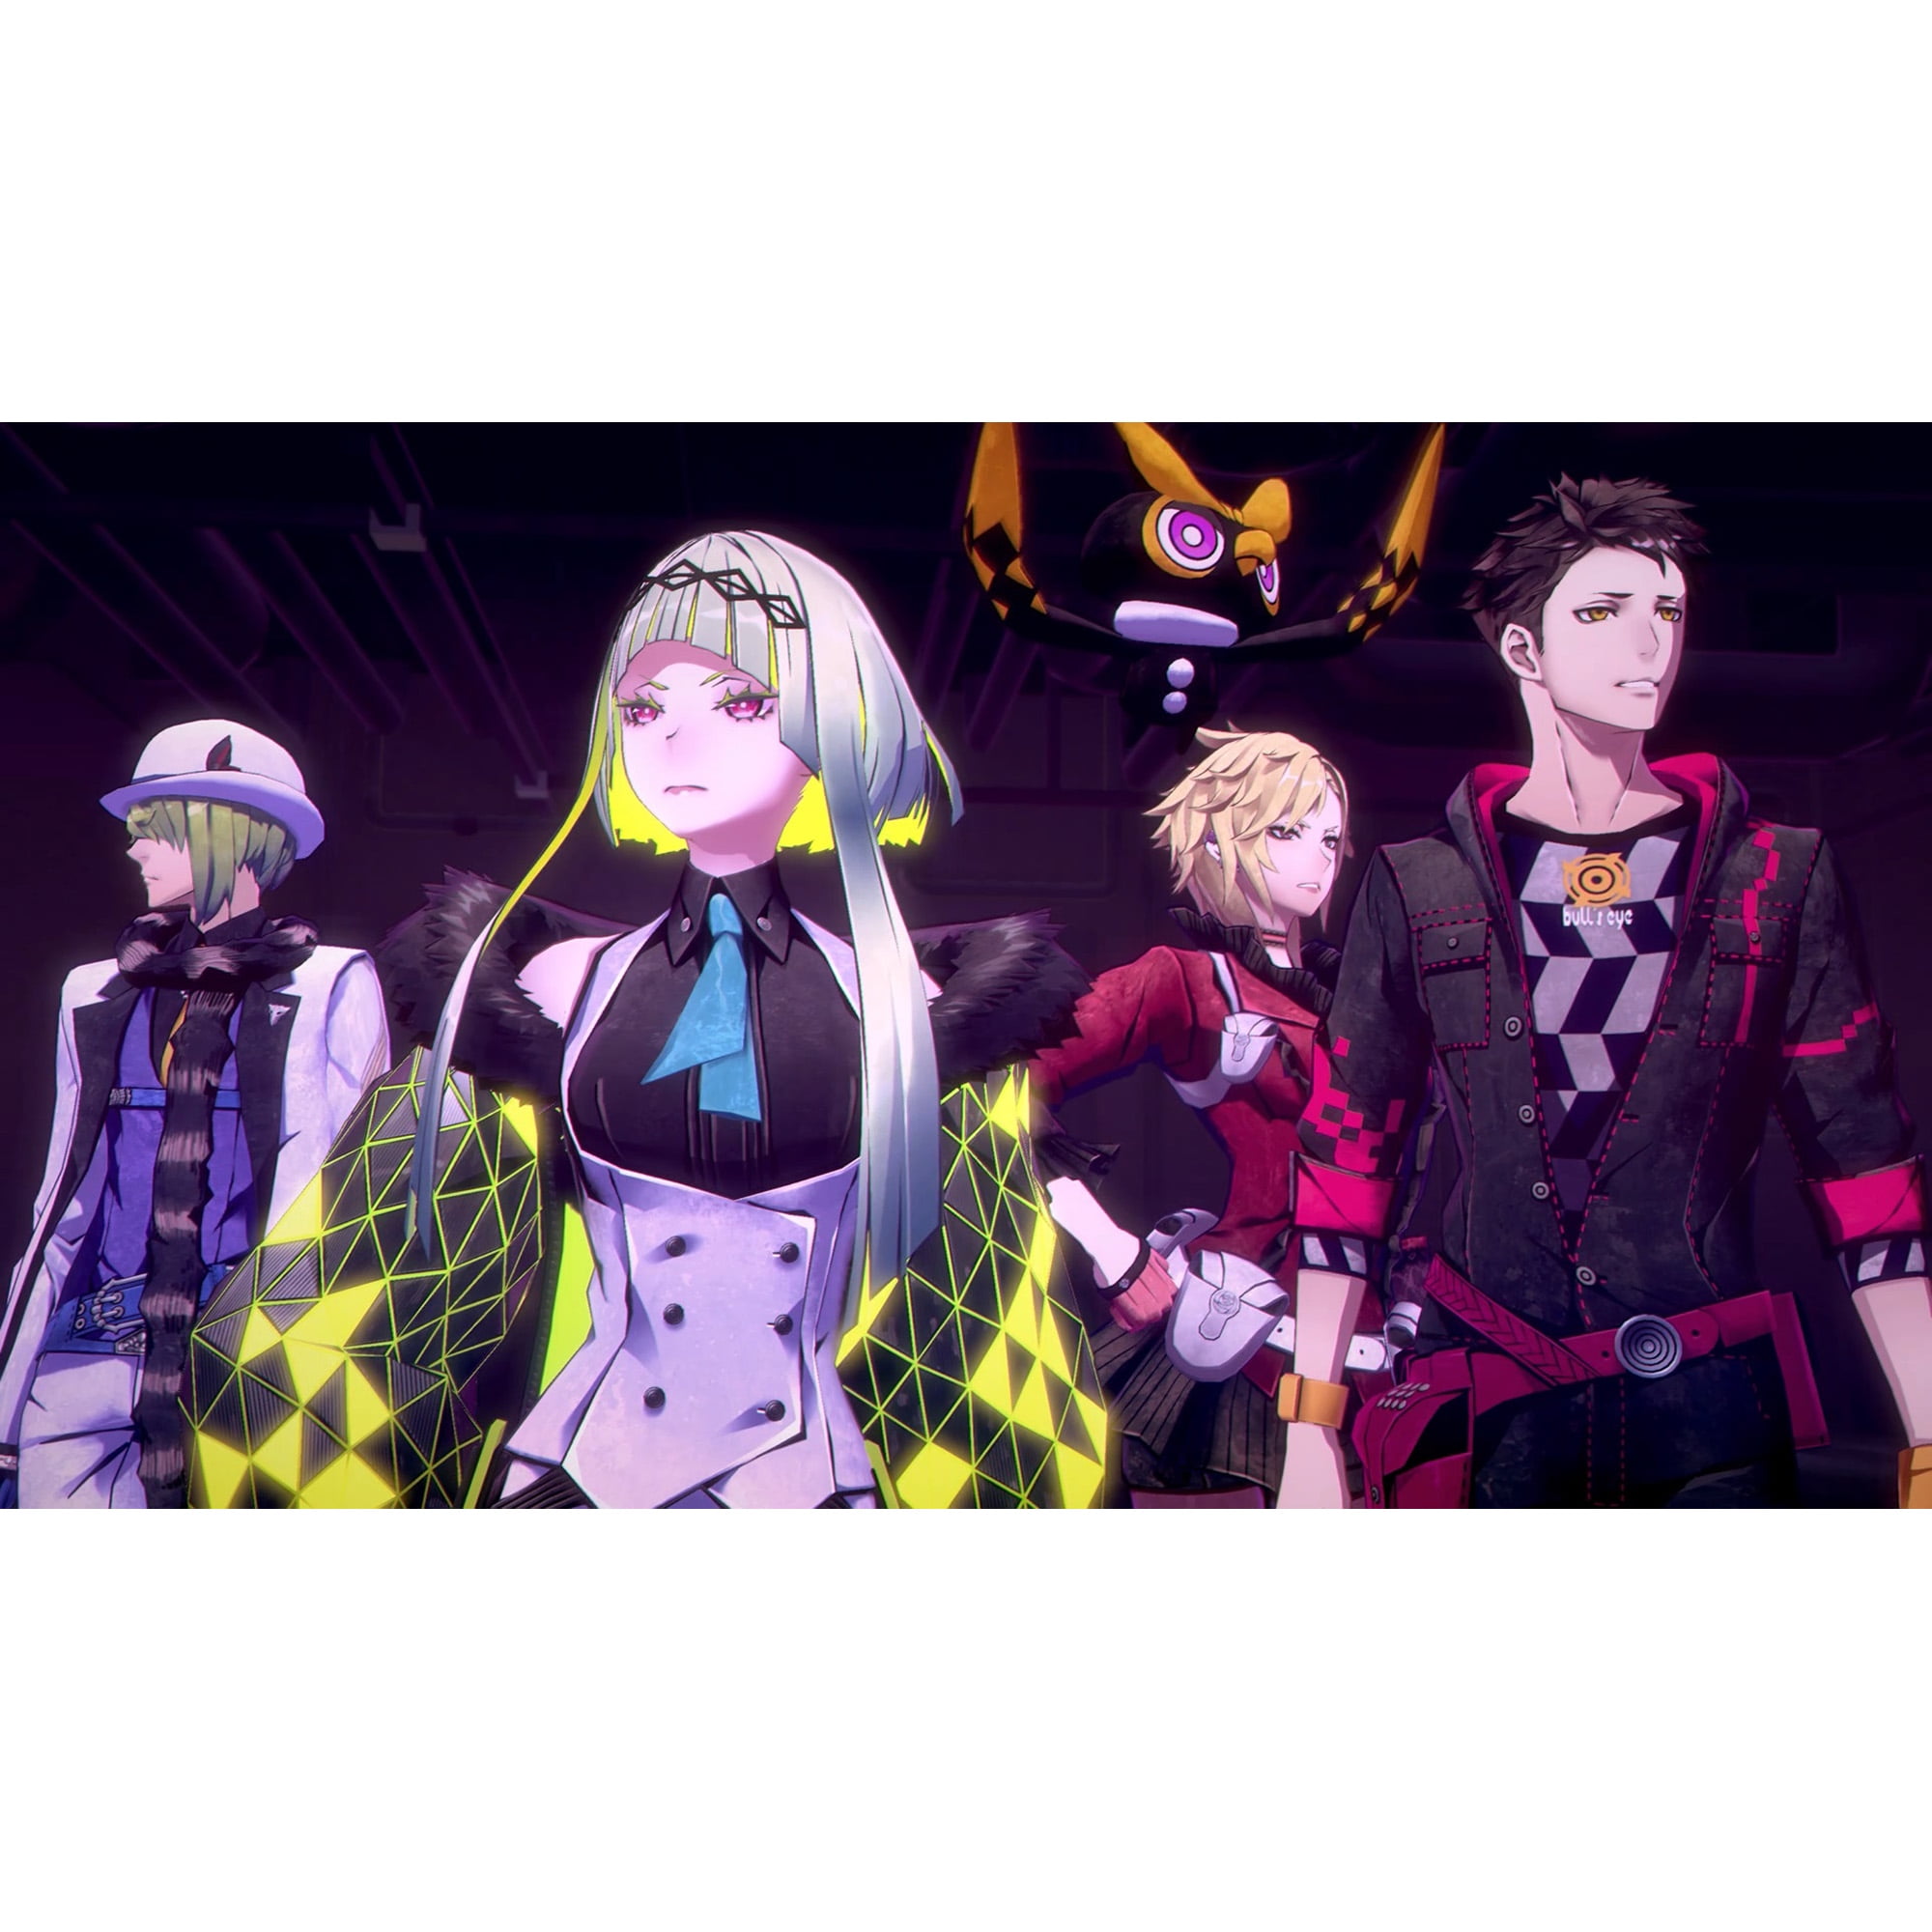 Persona publisher's 'Soul Hackers 2' JRPG announced for Xbox, PC